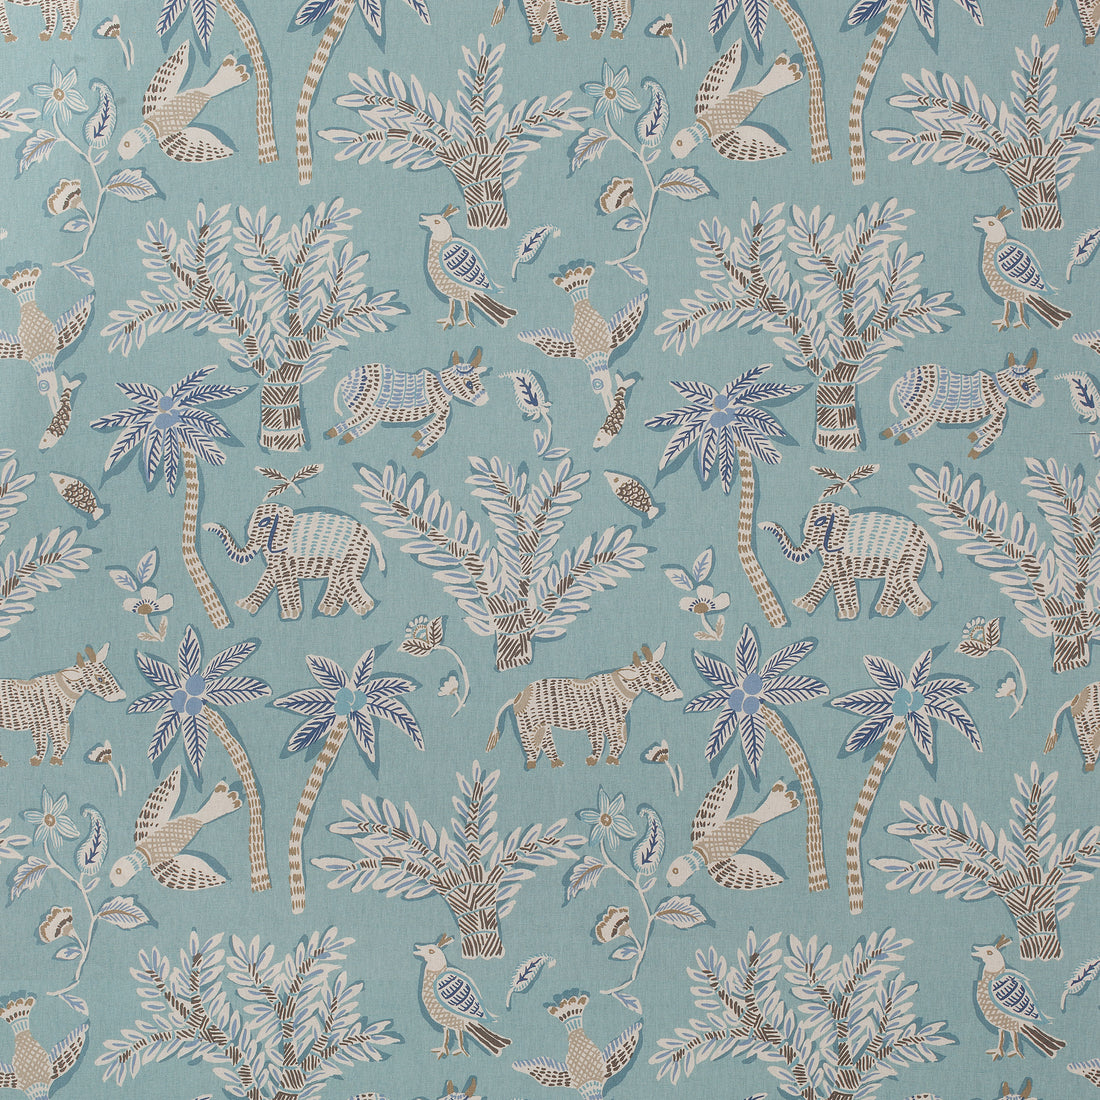 Goa fabric in teal color - pattern number F988723 - by Thibaut in the Trade Routes collection